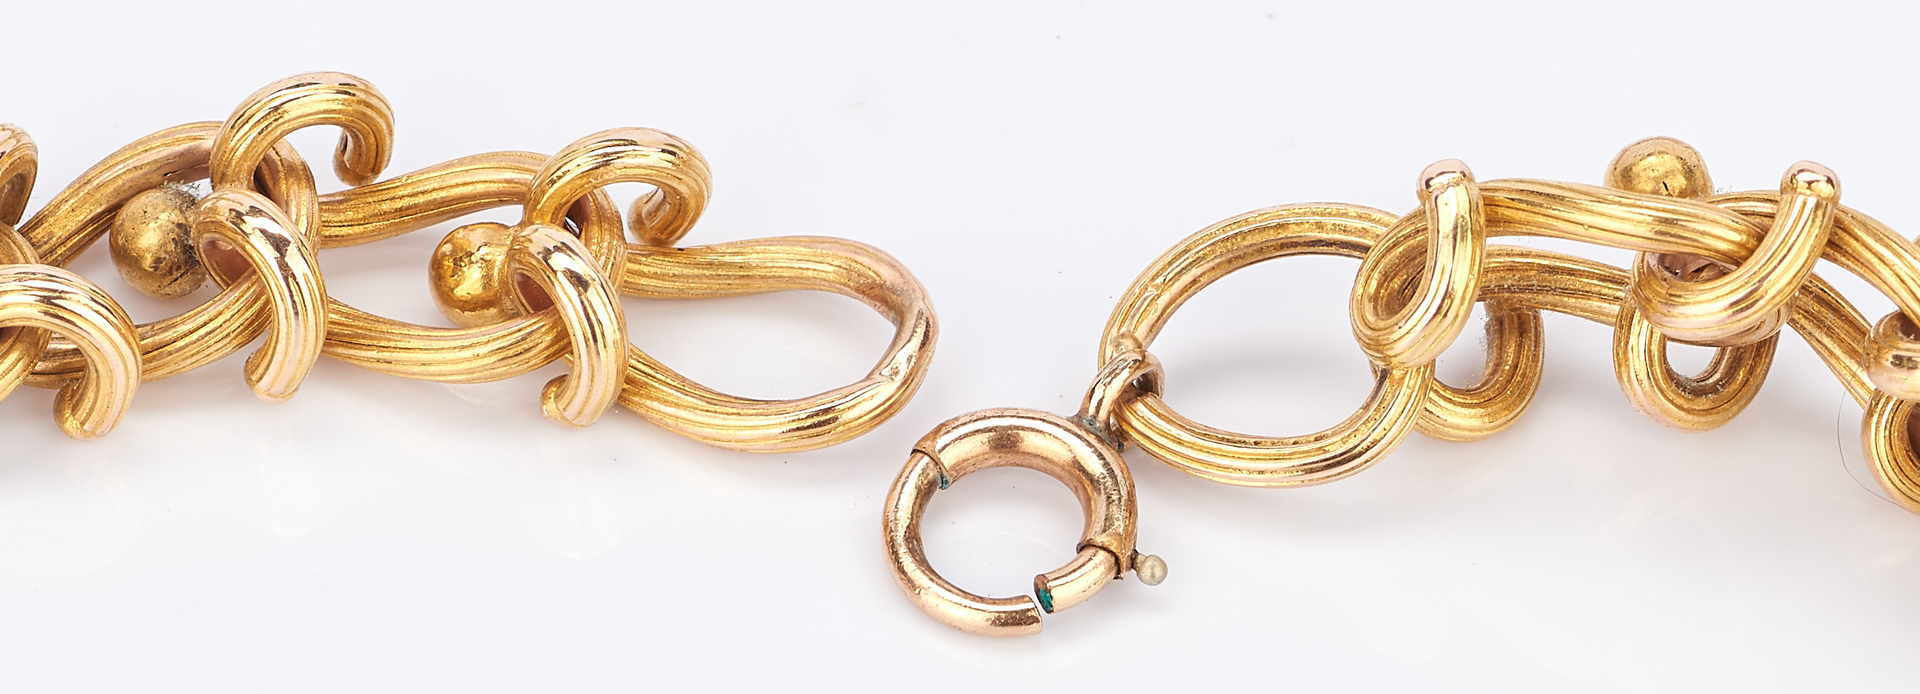 Lot 765: 14K Yellow Gold Link Necklace